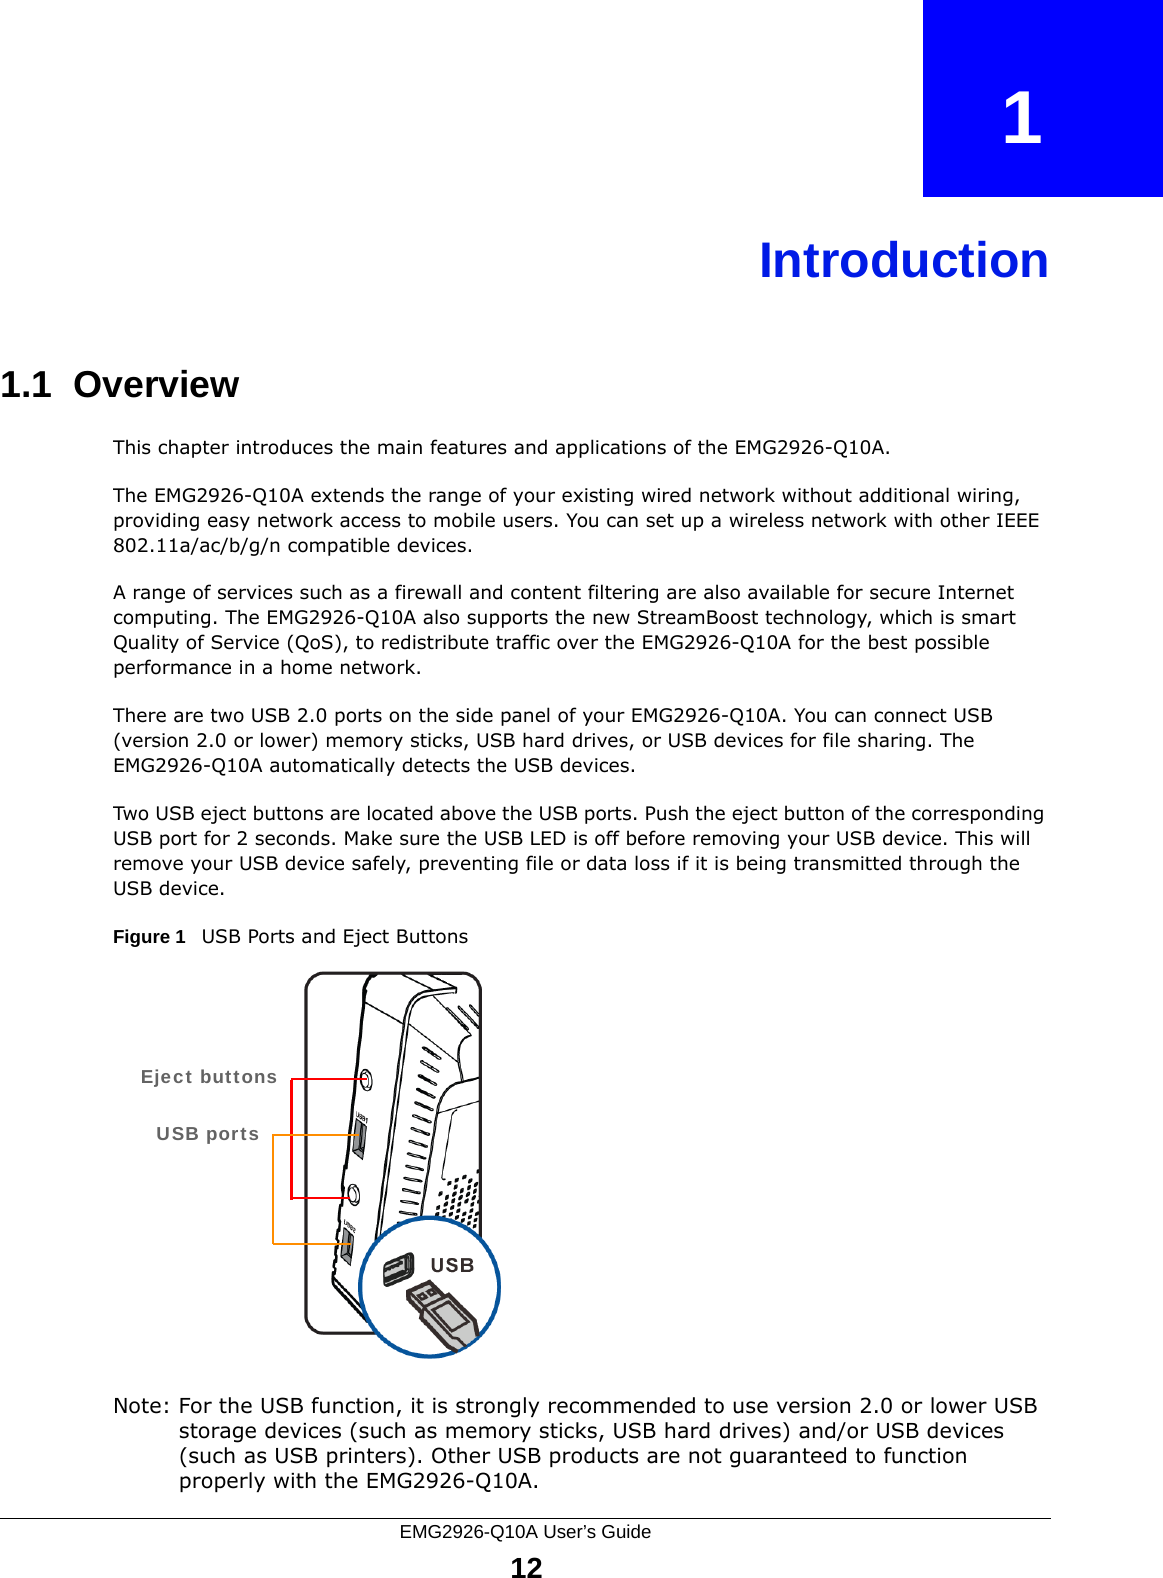 EMG2926-Q10A User’s Guide12CHAPTER   1Introduction1.1  OverviewThis chapter introduces the main features and applications of the EMG2926-Q10A.The EMG2926-Q10A extends the range of your existing wired network without additional wiring, providing easy network access to mobile users. You can set up a wireless network with other IEEE 802.11a/ac/b/g/n compatible devices. A range of services such as a firewall and content filtering are also available for secure Internet computing. The EMG2926-Q10A also supports the new StreamBoost technology, which is smart Quality of Service (QoS), to redistribute traffic over the EMG2926-Q10A for the best possible performance in a home network. There are two USB 2.0 ports on the side panel of your EMG2926-Q10A. You can connect USB (version 2.0 or lower) memory sticks, USB hard drives, or USB devices for file sharing. The EMG2926-Q10A automatically detects the USB devices. Two USB eject buttons are located above the USB ports. Push the eject button of the corresponding USB port for 2 seconds. Make sure the USB LED is off before removing your USB device. This will remove your USB device safely, preventing file or data loss if it is being transmitted through the USB device.Figure 1   USB Ports and Eject ButtonsNote: For the USB function, it is strongly recommended to use version 2.0 or lower USB storage devices (such as memory sticks, USB hard drives) and/or USB devices (such as USB printers). Other USB products are not guaranteed to function properly with the EMG2926-Q10A.Eject buttonsUSB ports